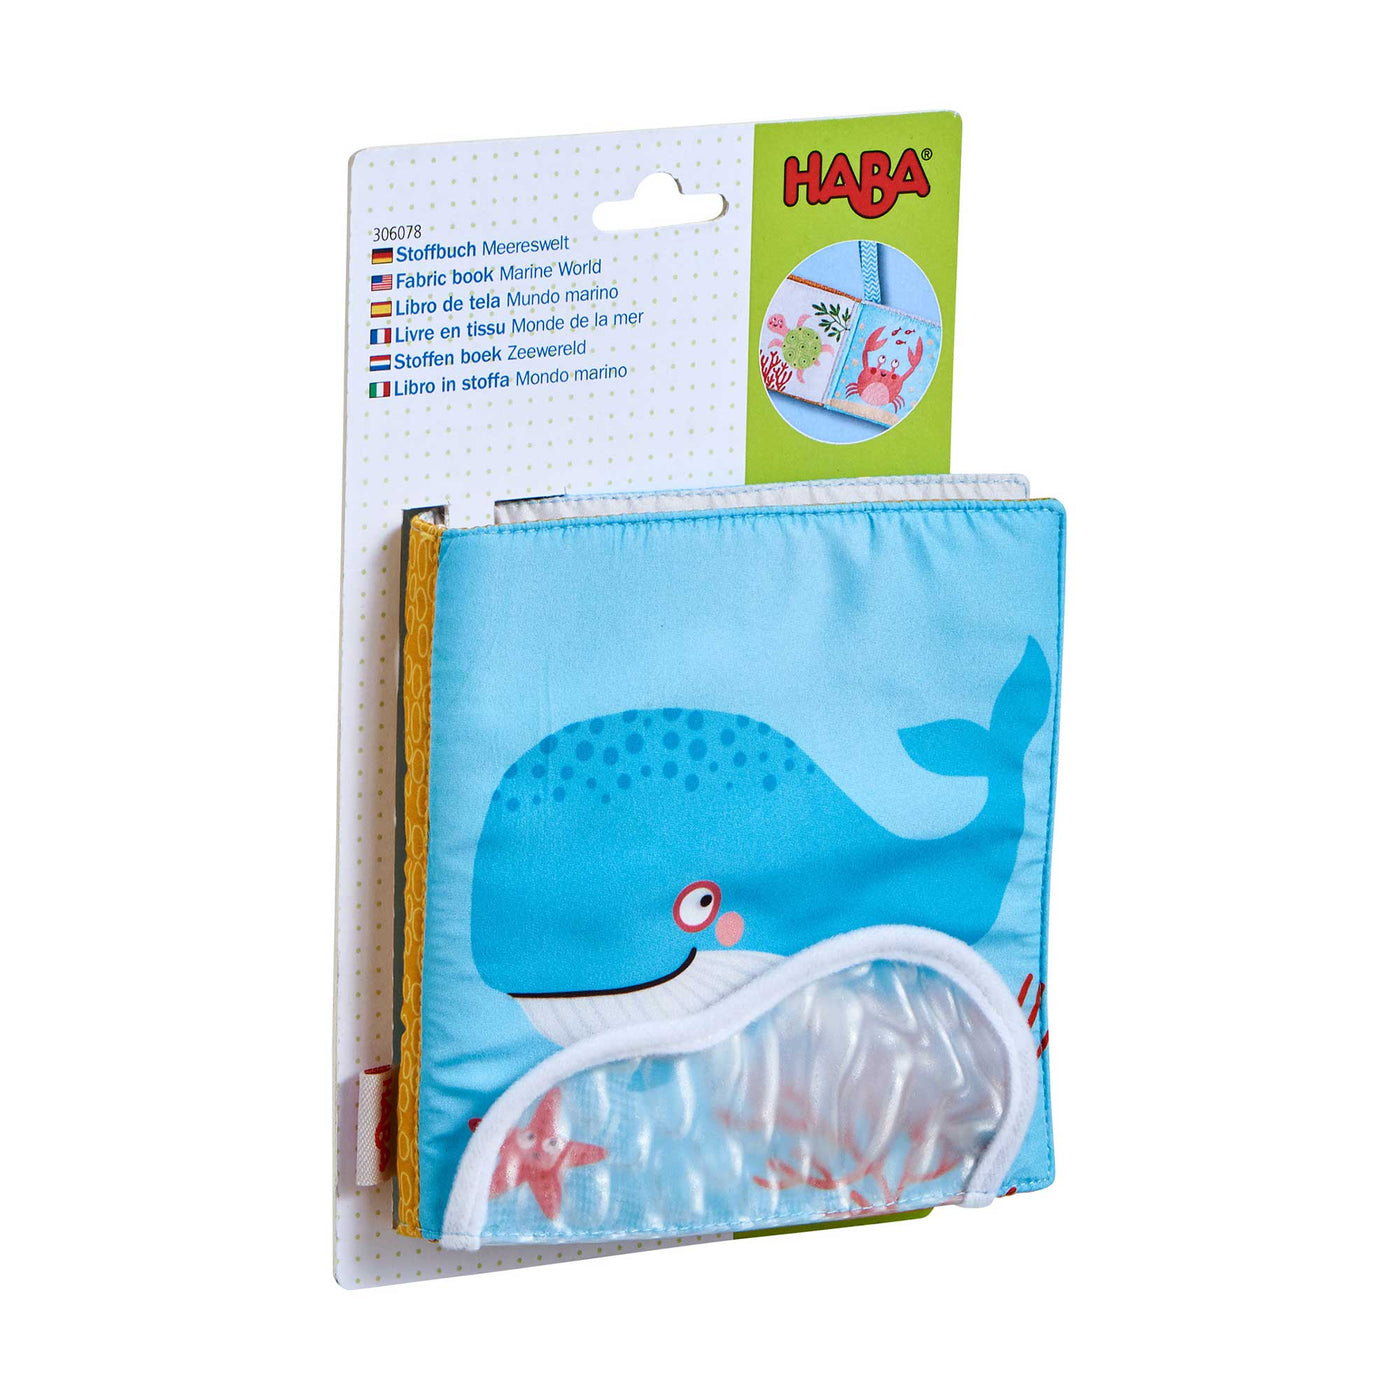 HABA Marine World Soft Book with packaging